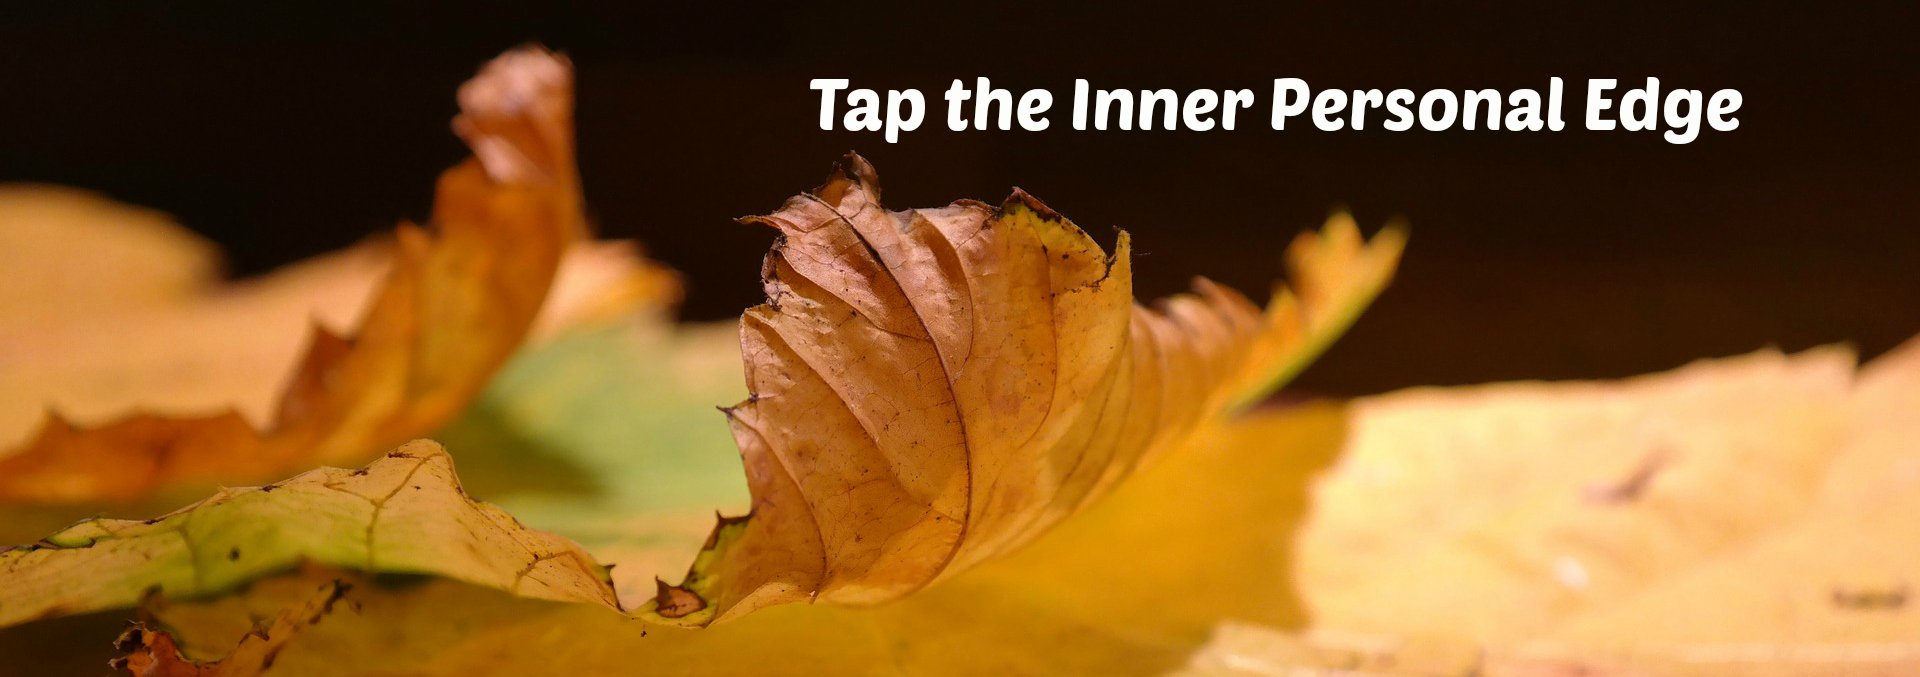 Edge of fall tree leaf, illustrating the theme, "Tap the Inner Personal Edge."